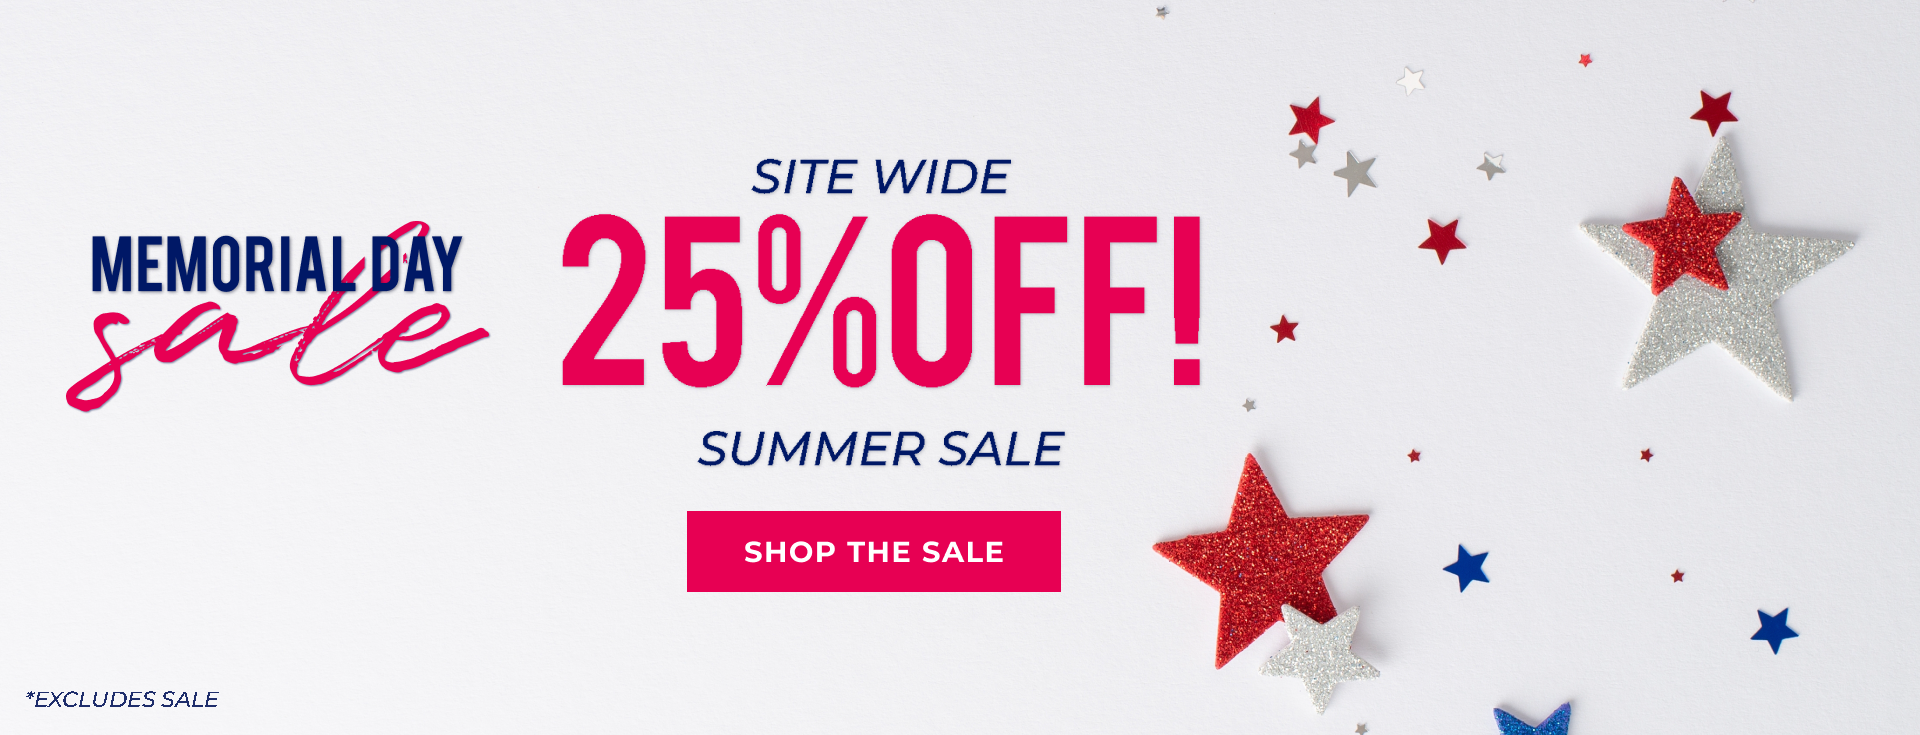 Memomorial Day Sale 25% off sitewide summer sale (excluding sale) Shop the Sale